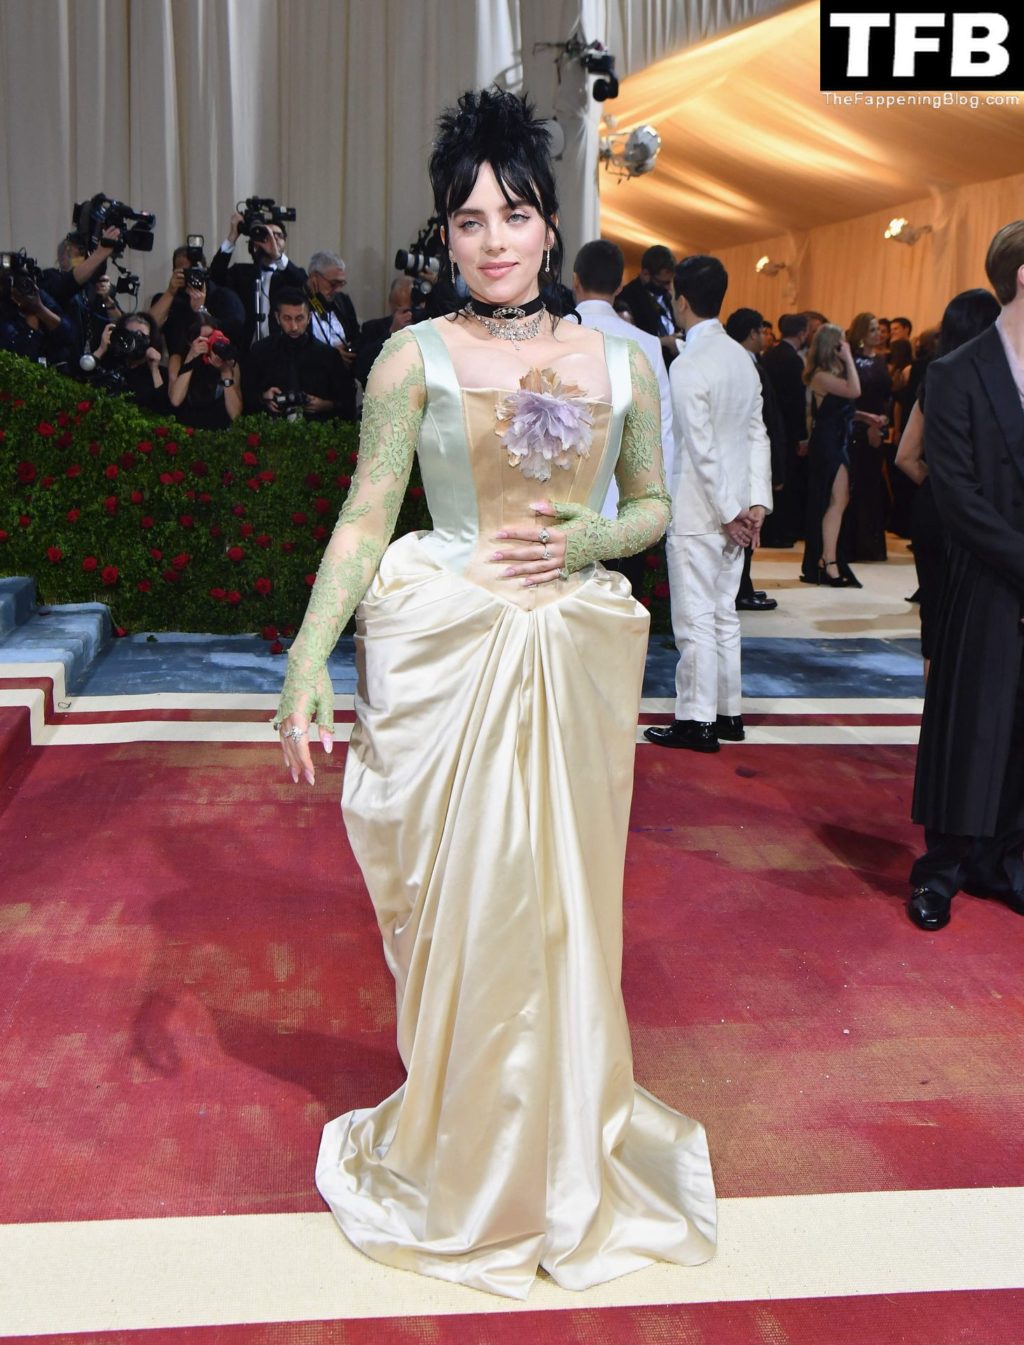 Billie Eilish Sexy The Fappening Blog 83 1024x1345 - Billie Eilish Showcases Nice Cleavage at The 2022 Met Gala in NYC (155 Photos)